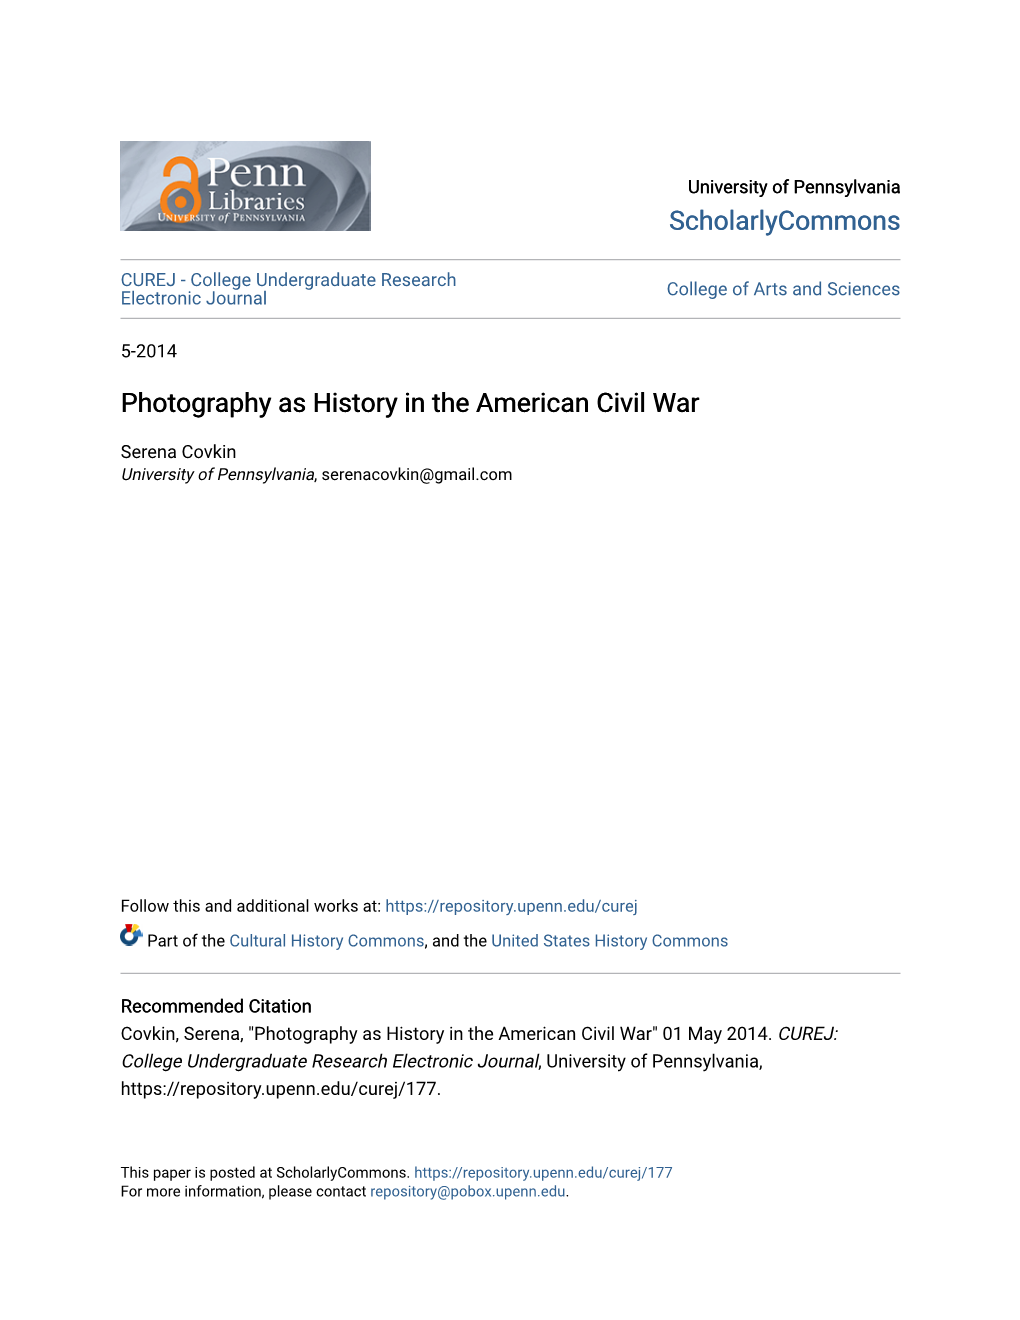 Photography As History in the American Civil War